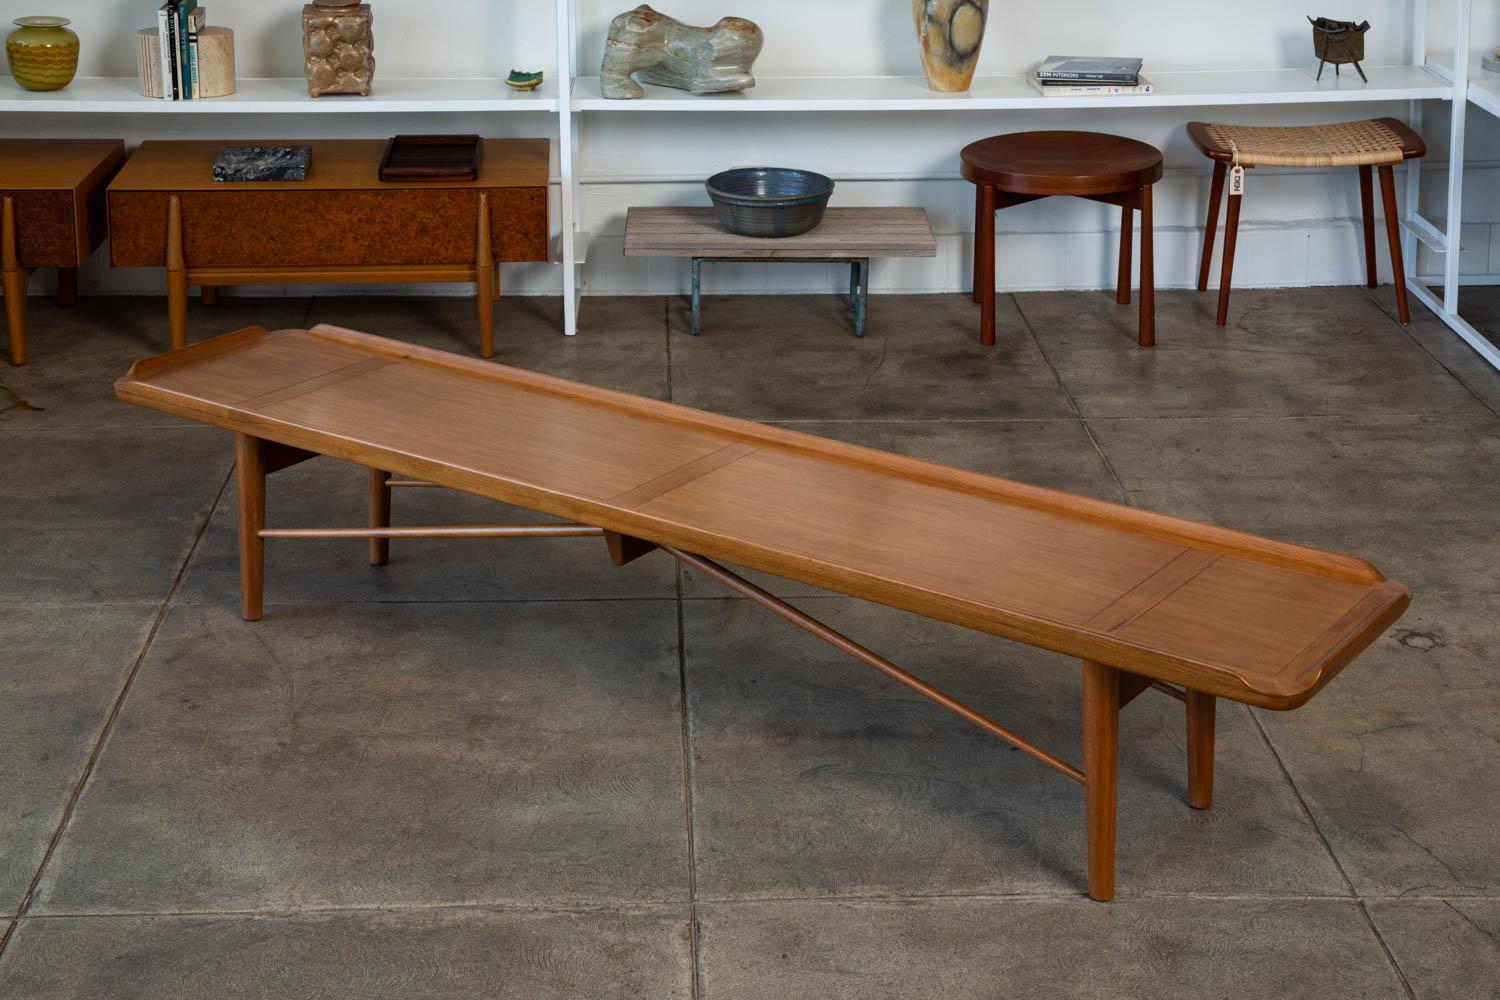 Finn Juhl designed this walnut bench for Baker in 1951, who then subsequently named it “Rectangular Cocktail Table”, even though Juhl’s original sketch was entitled “bench.”

The legs, seat, and stretchers are made of solid walnut and the top